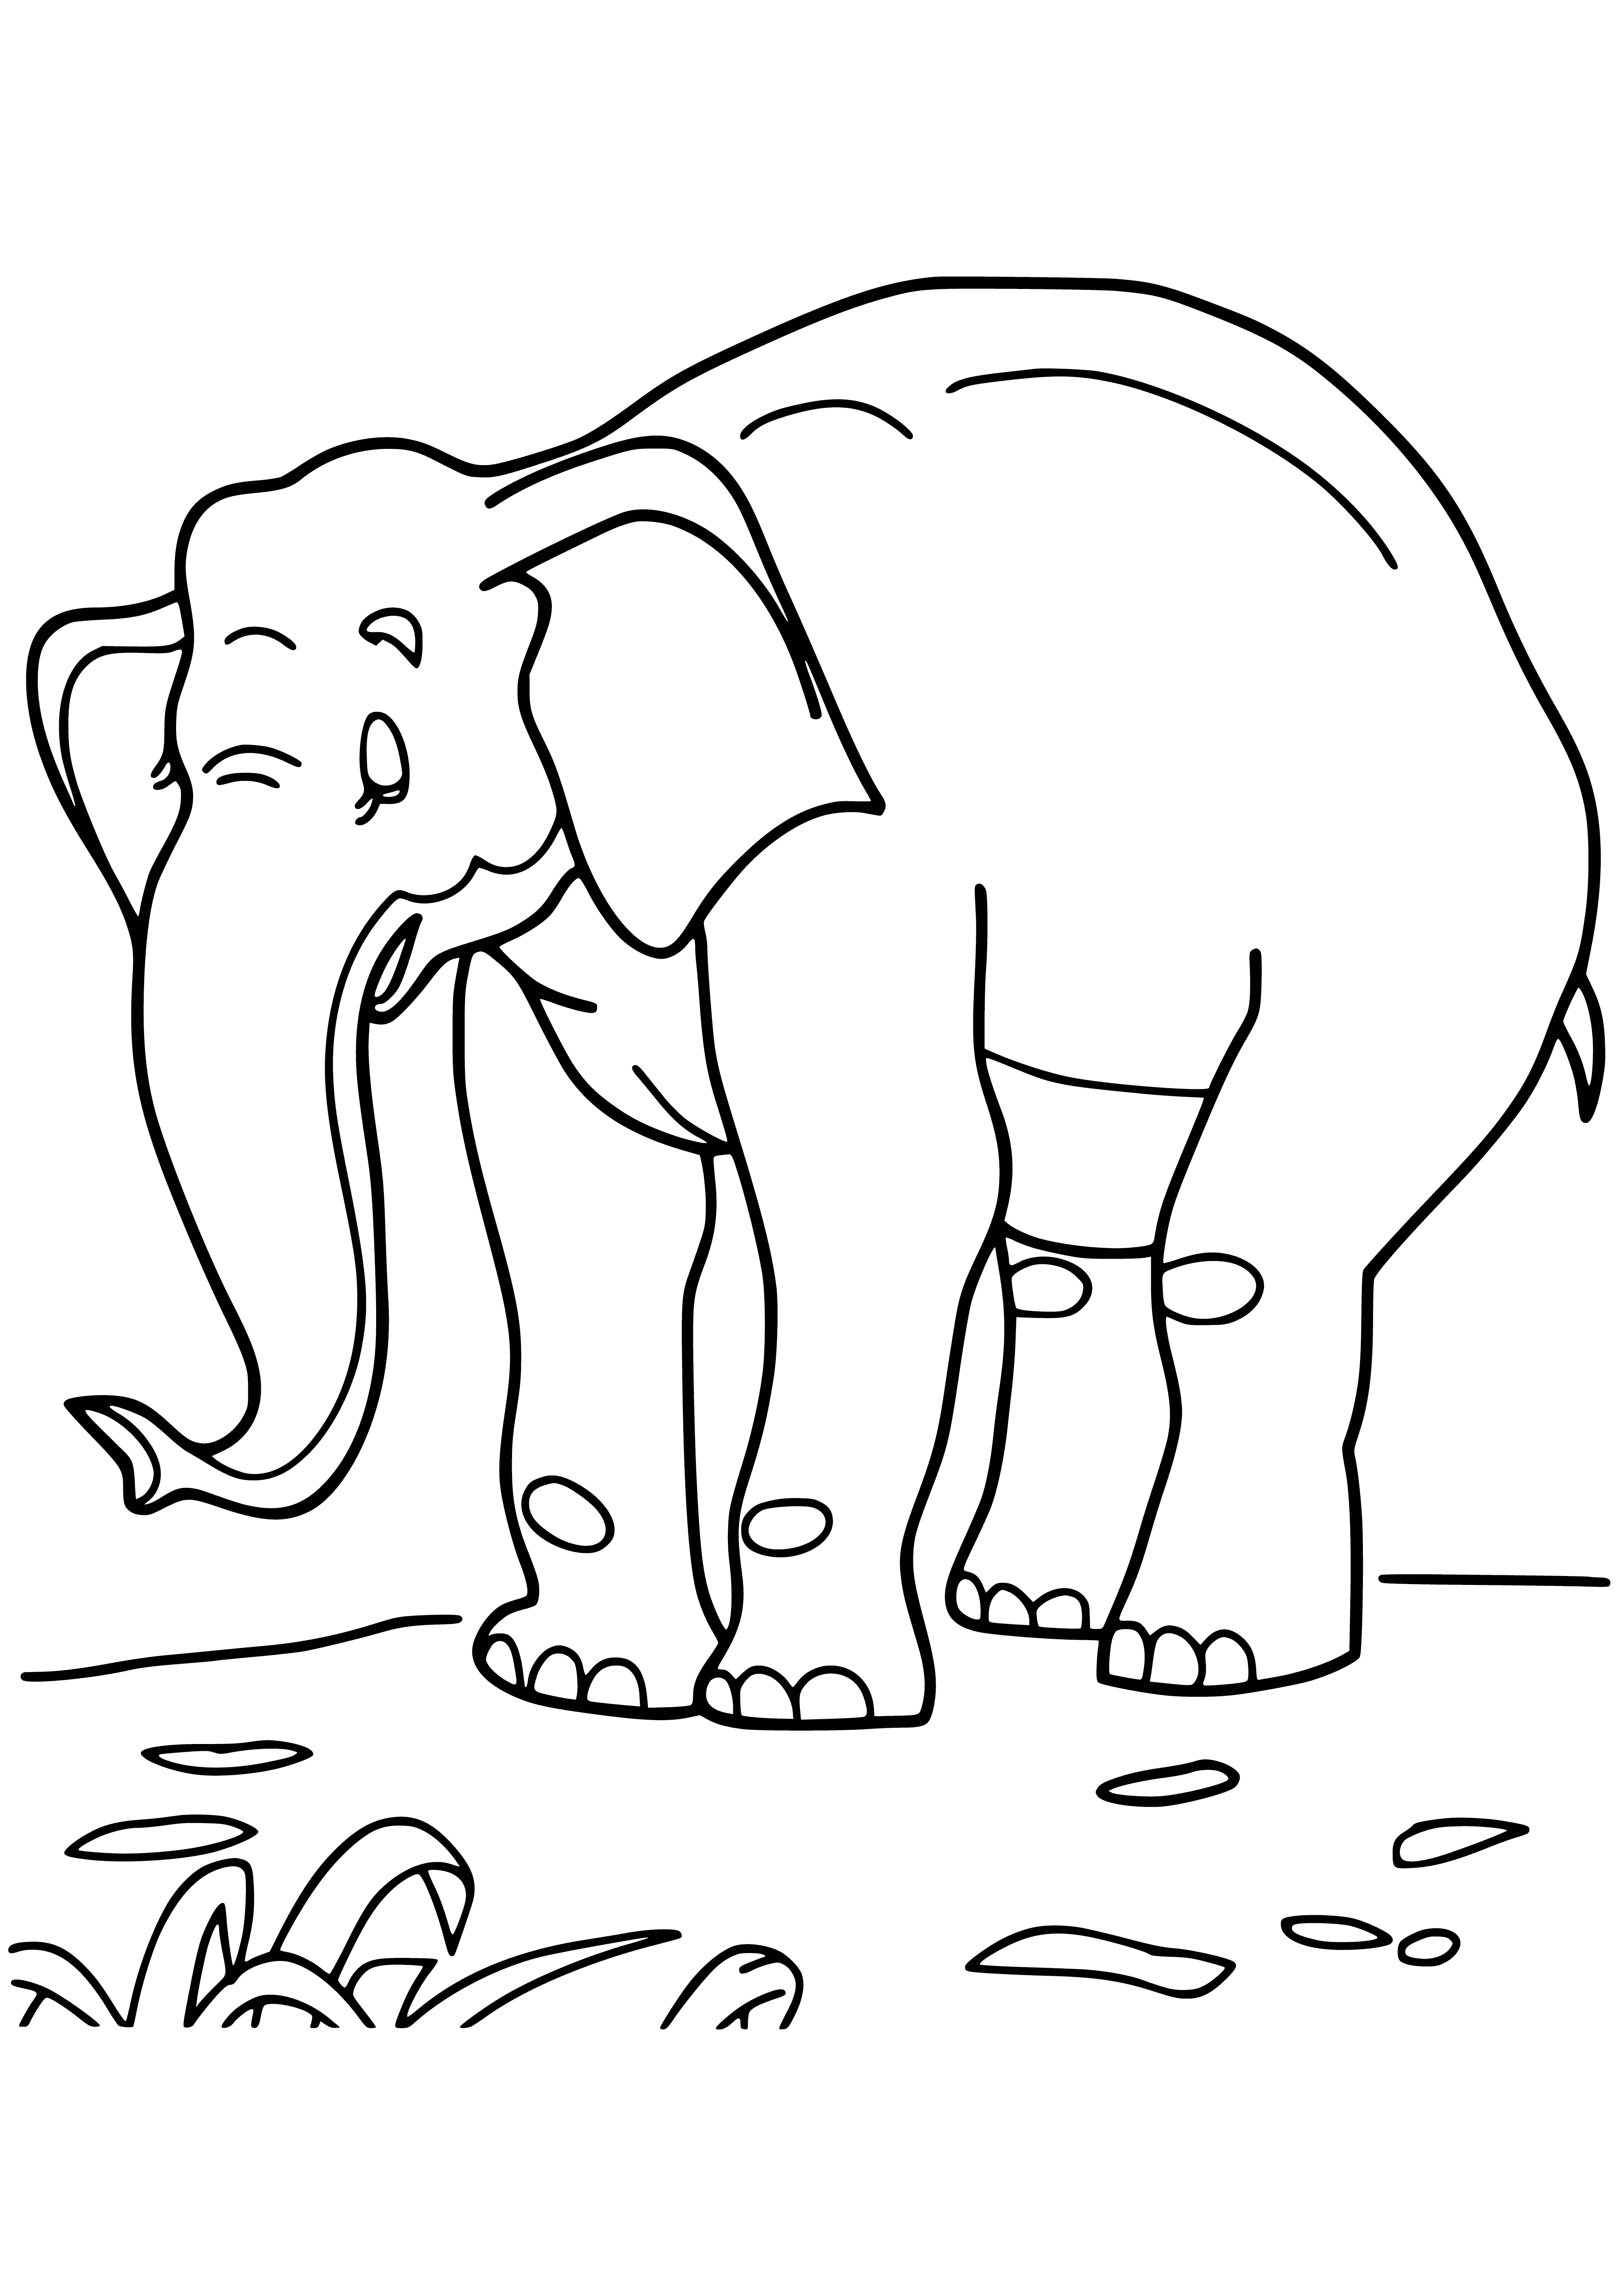 coloring page: Mammoths are gentle giants: furry, curious and eager to explore their surroundings.